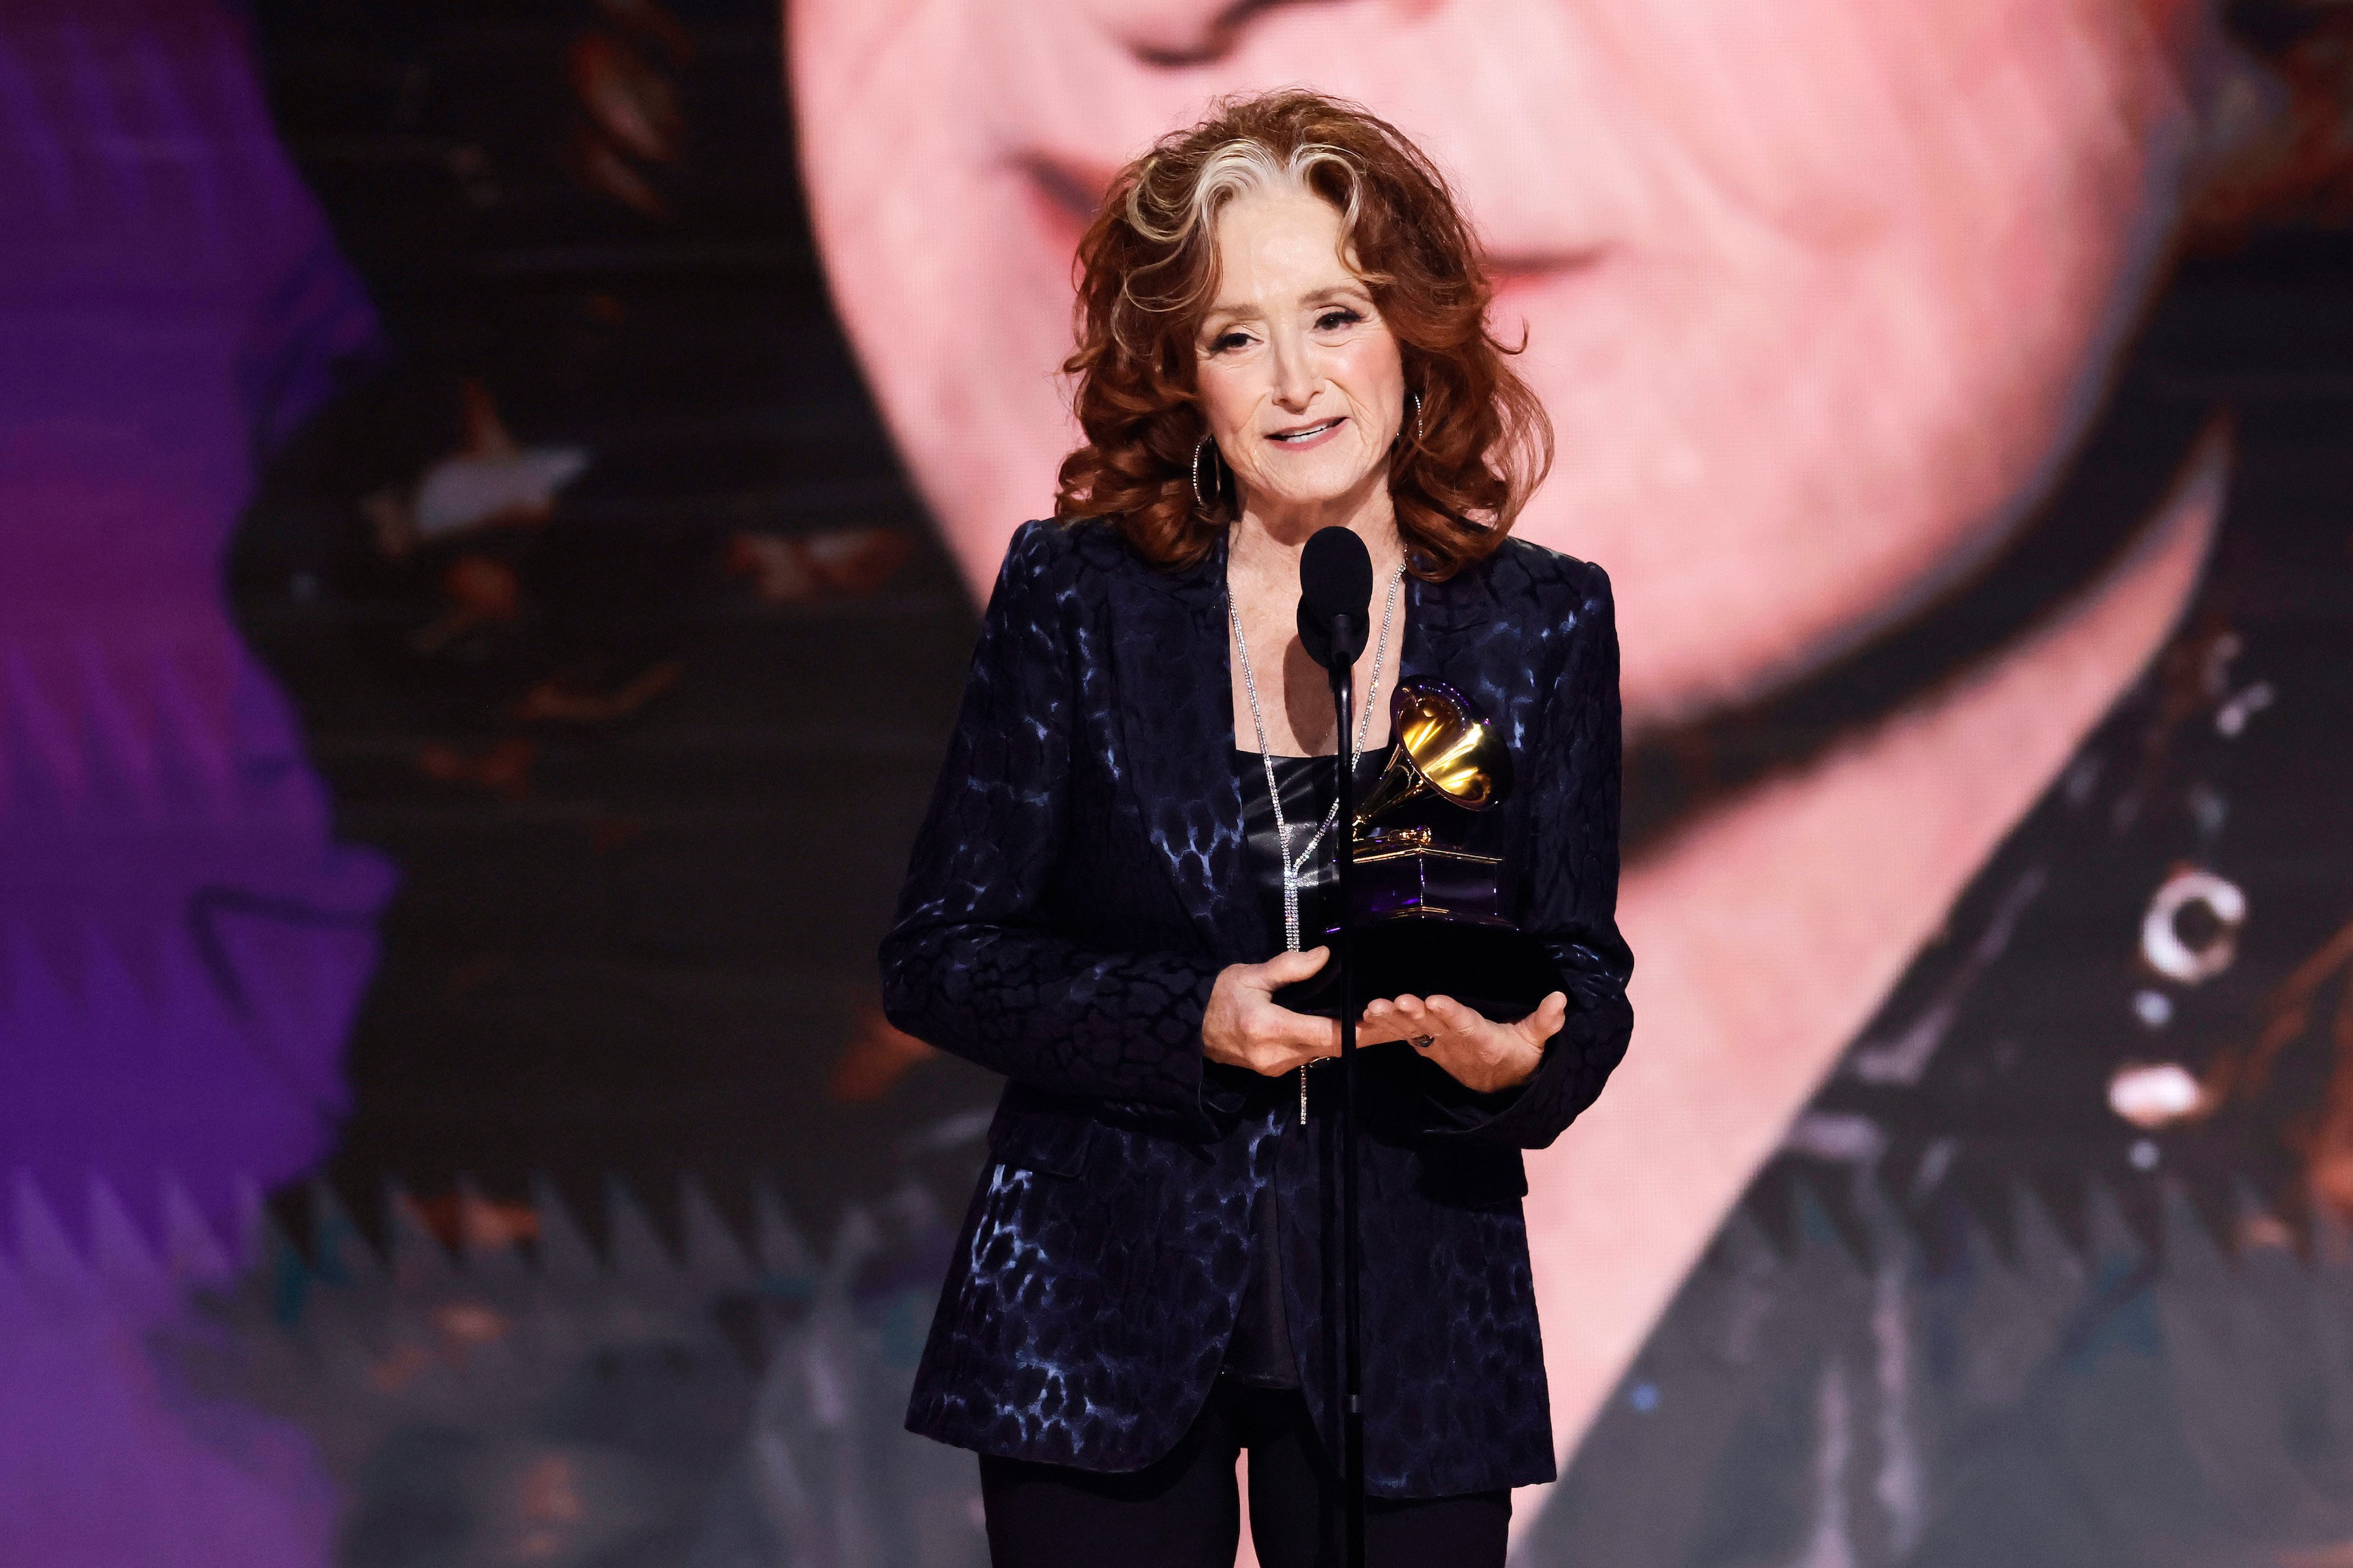 2023 Grammy Awards: ‘Just Like That’ by Bonnie Raitt Wins Song of the Year